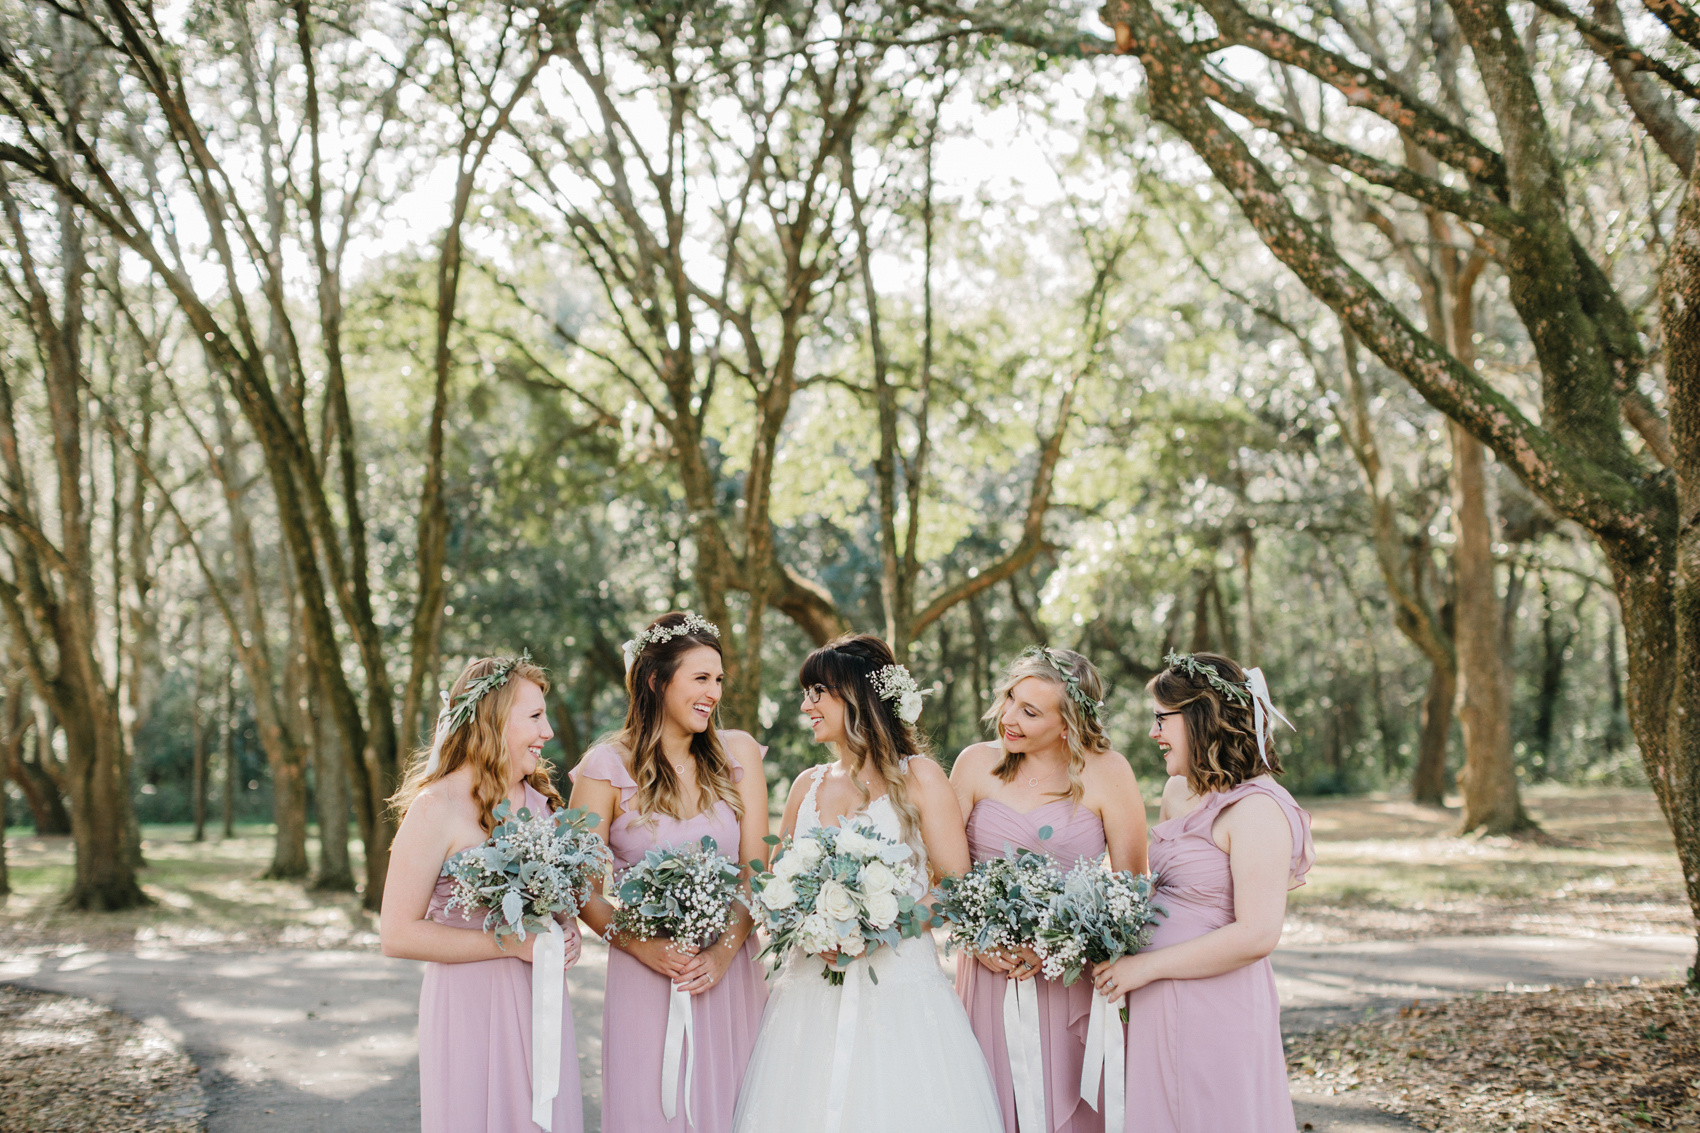 bridesmaids wearing dusty pink gowns laughing with the bride under the oak trees at the Lange Farm barn venue